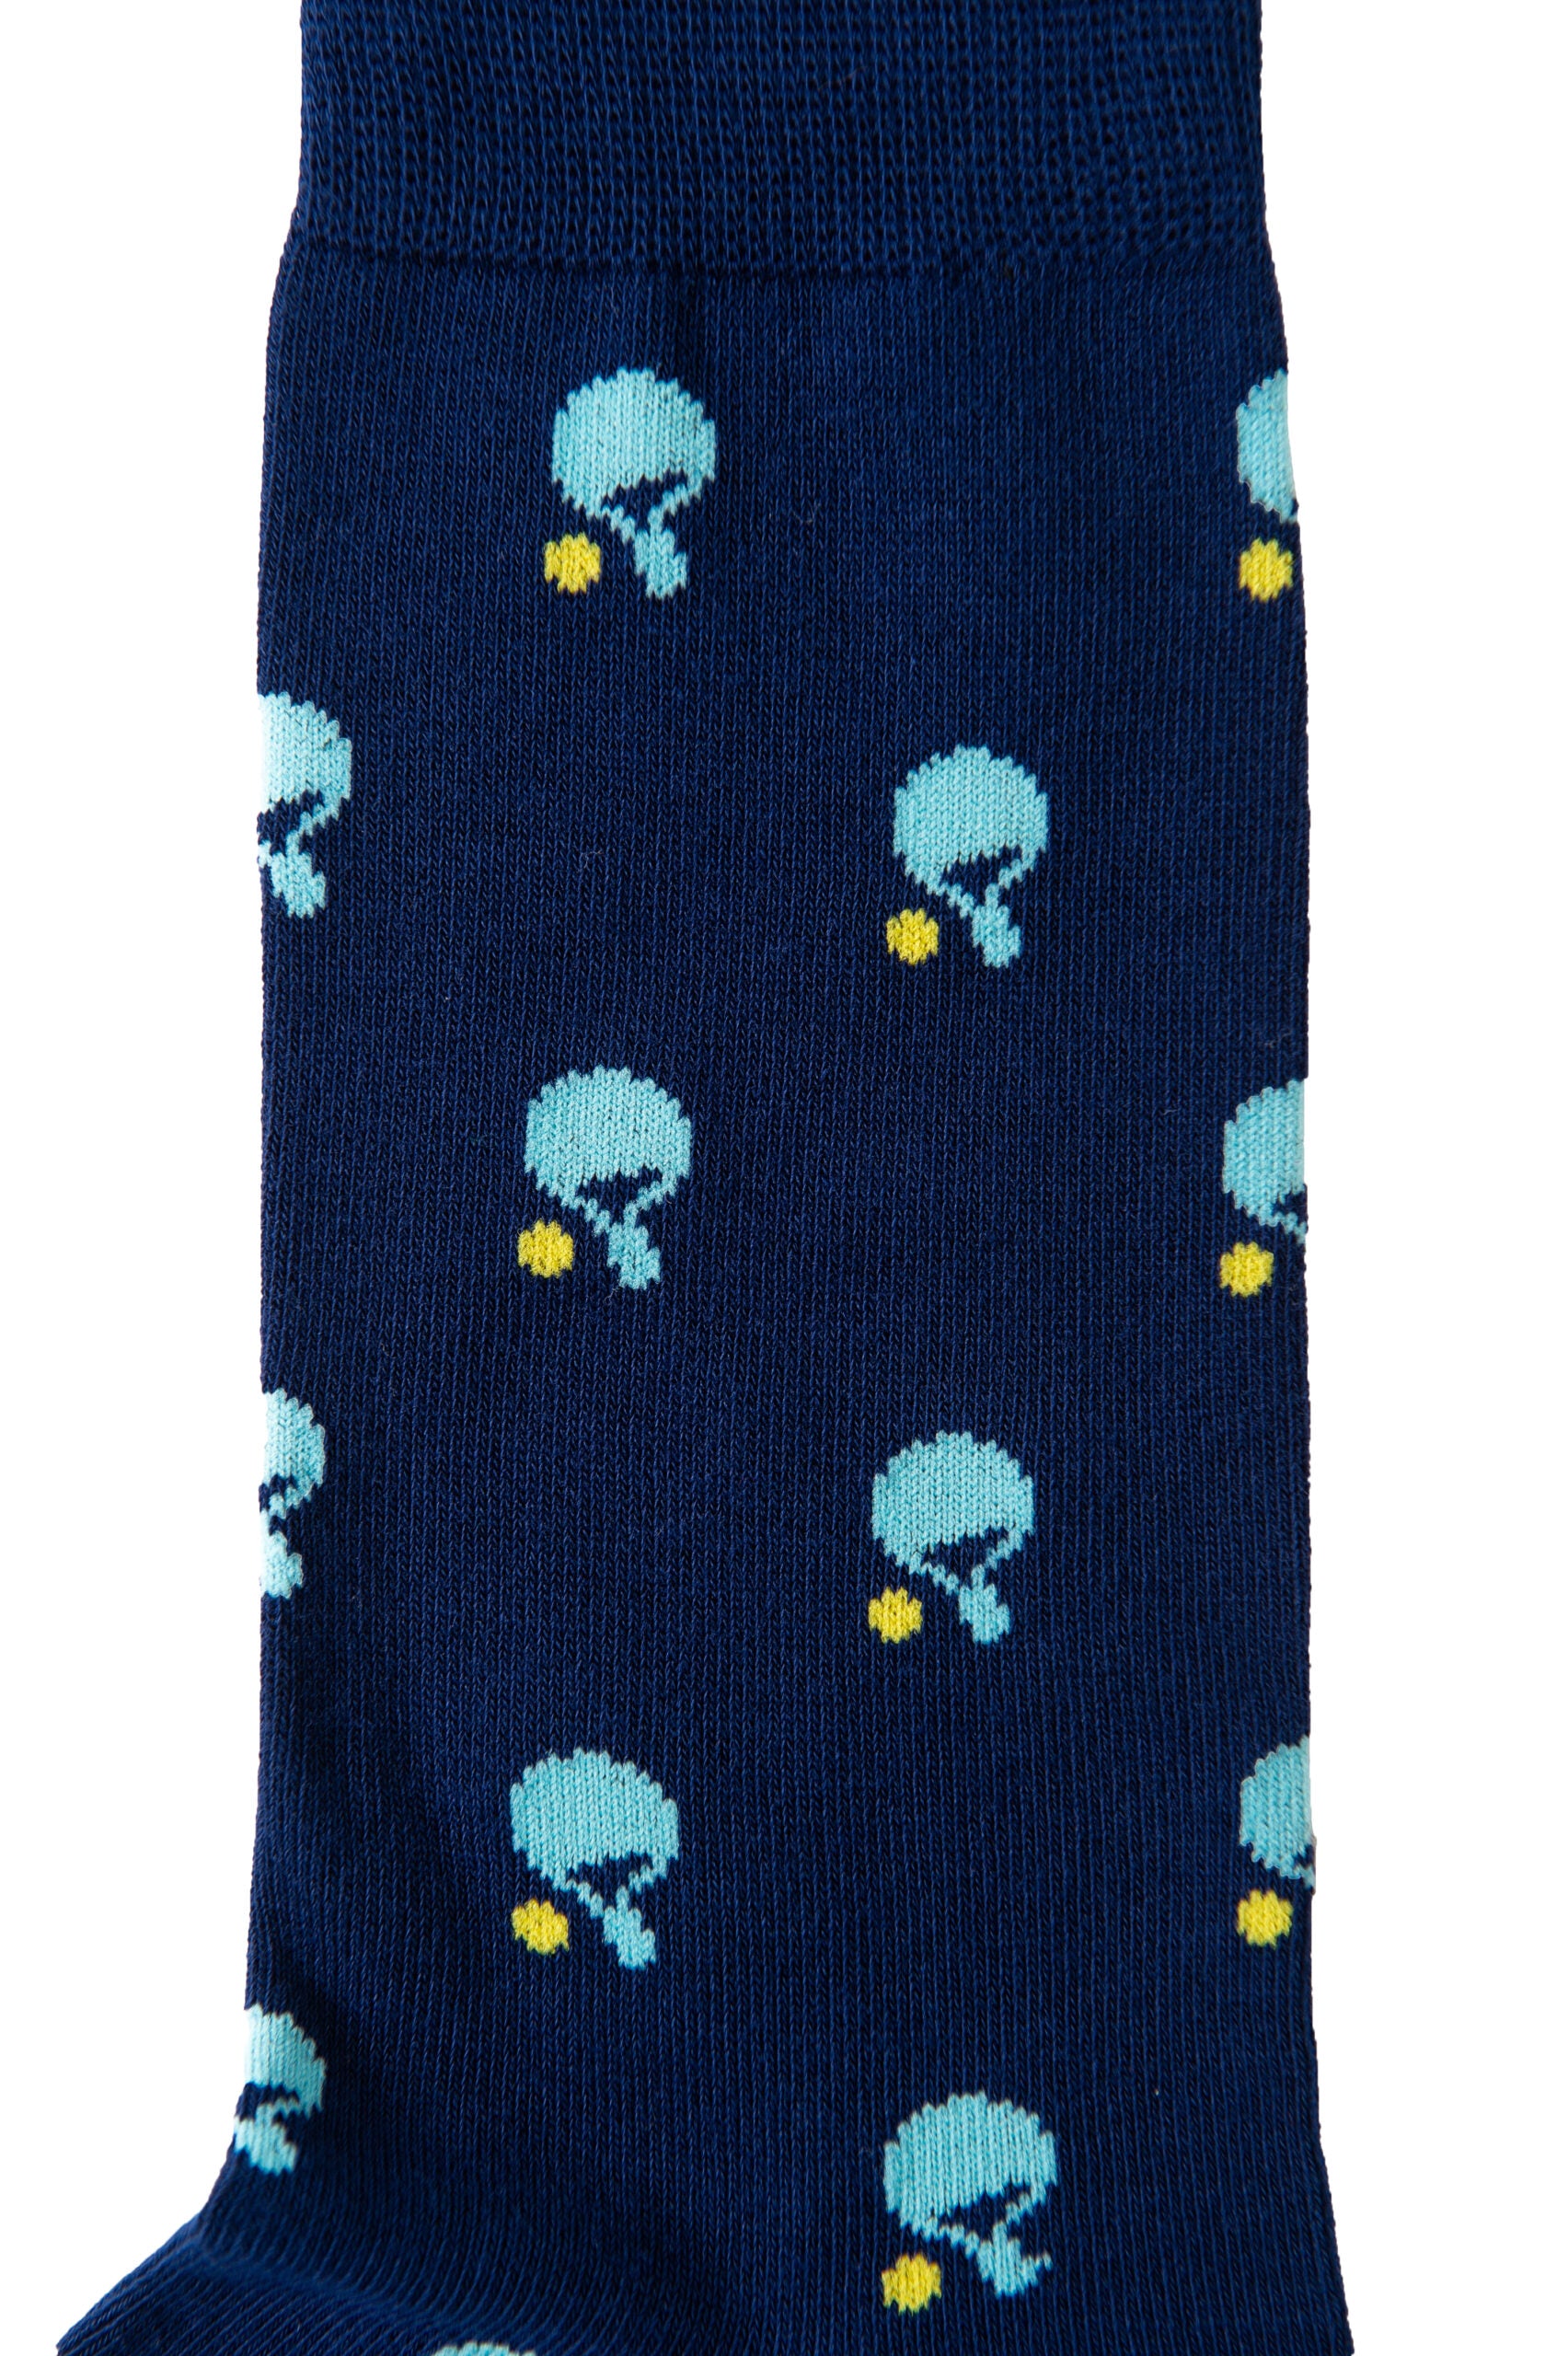 Blue Table Tennis Socks featuring a repeating pattern of small, light blue tennis racket and ball icons, ensuring perfection for your feet.